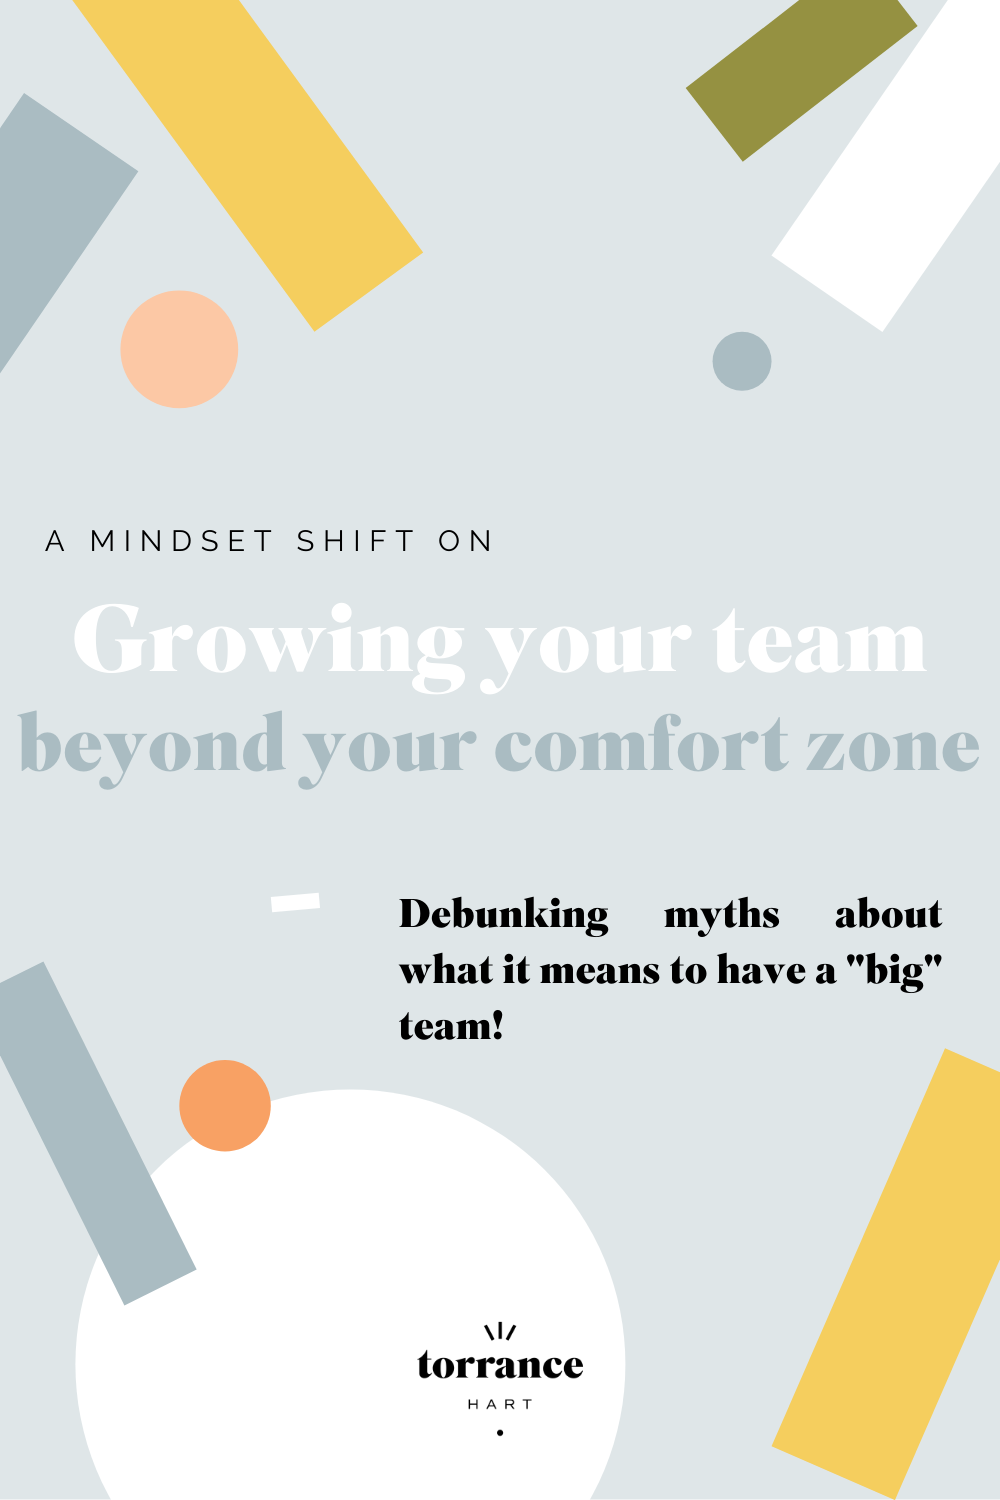 Growing your team beyond your comfort zone